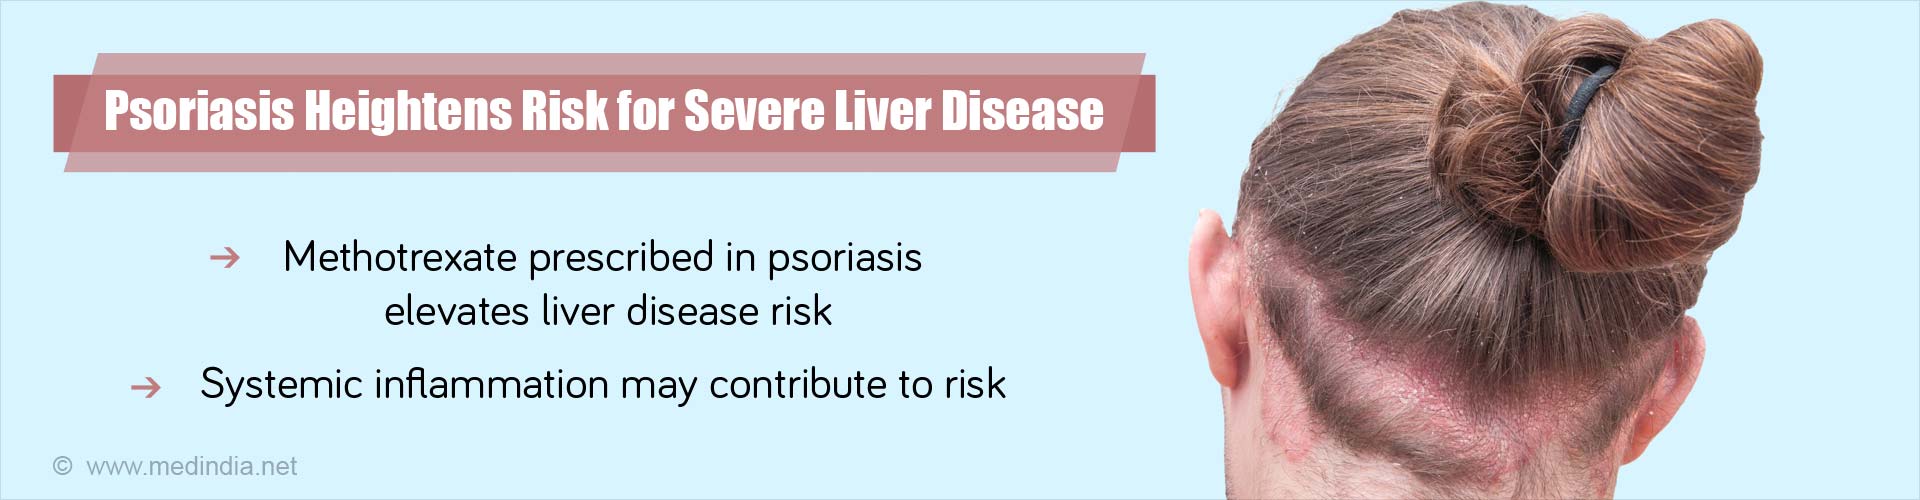 Psoriasis heightens risk for severe liver disease
- methotrexate prescribed in psoriasis elevates liver disease risk
- systemic inflammation may contribute to risk